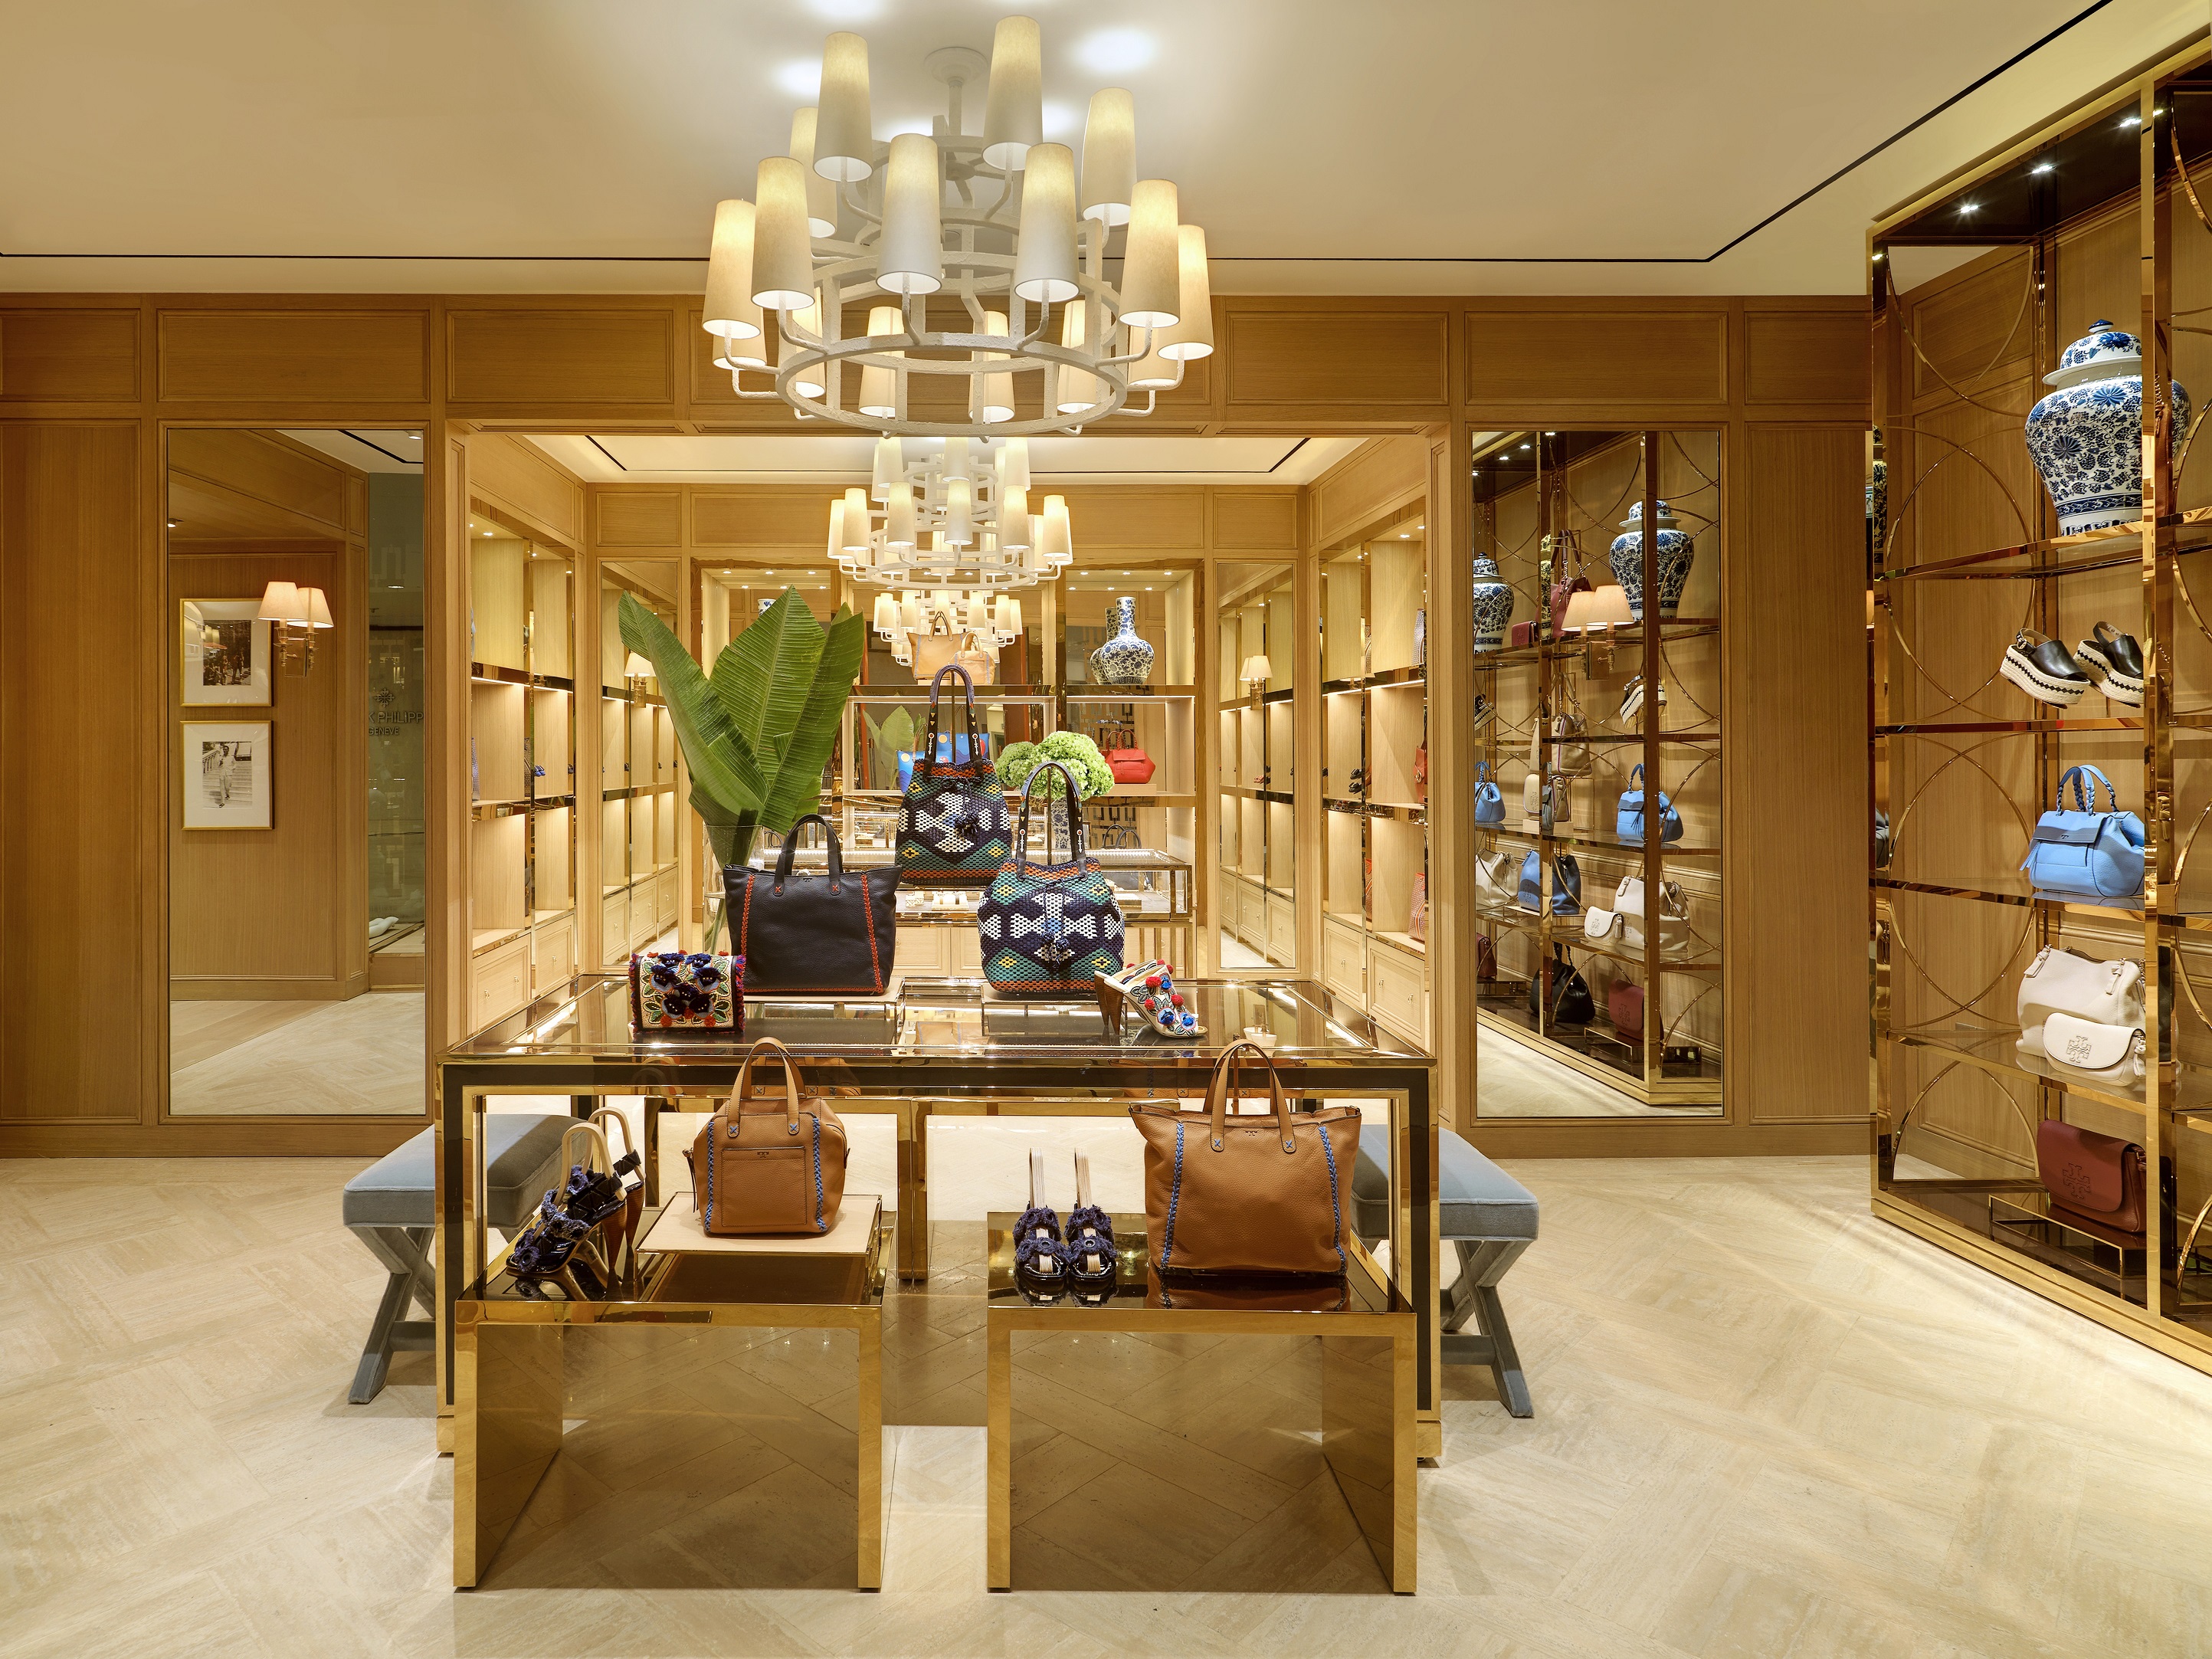 Tory Burch opens in Mall of Qatar